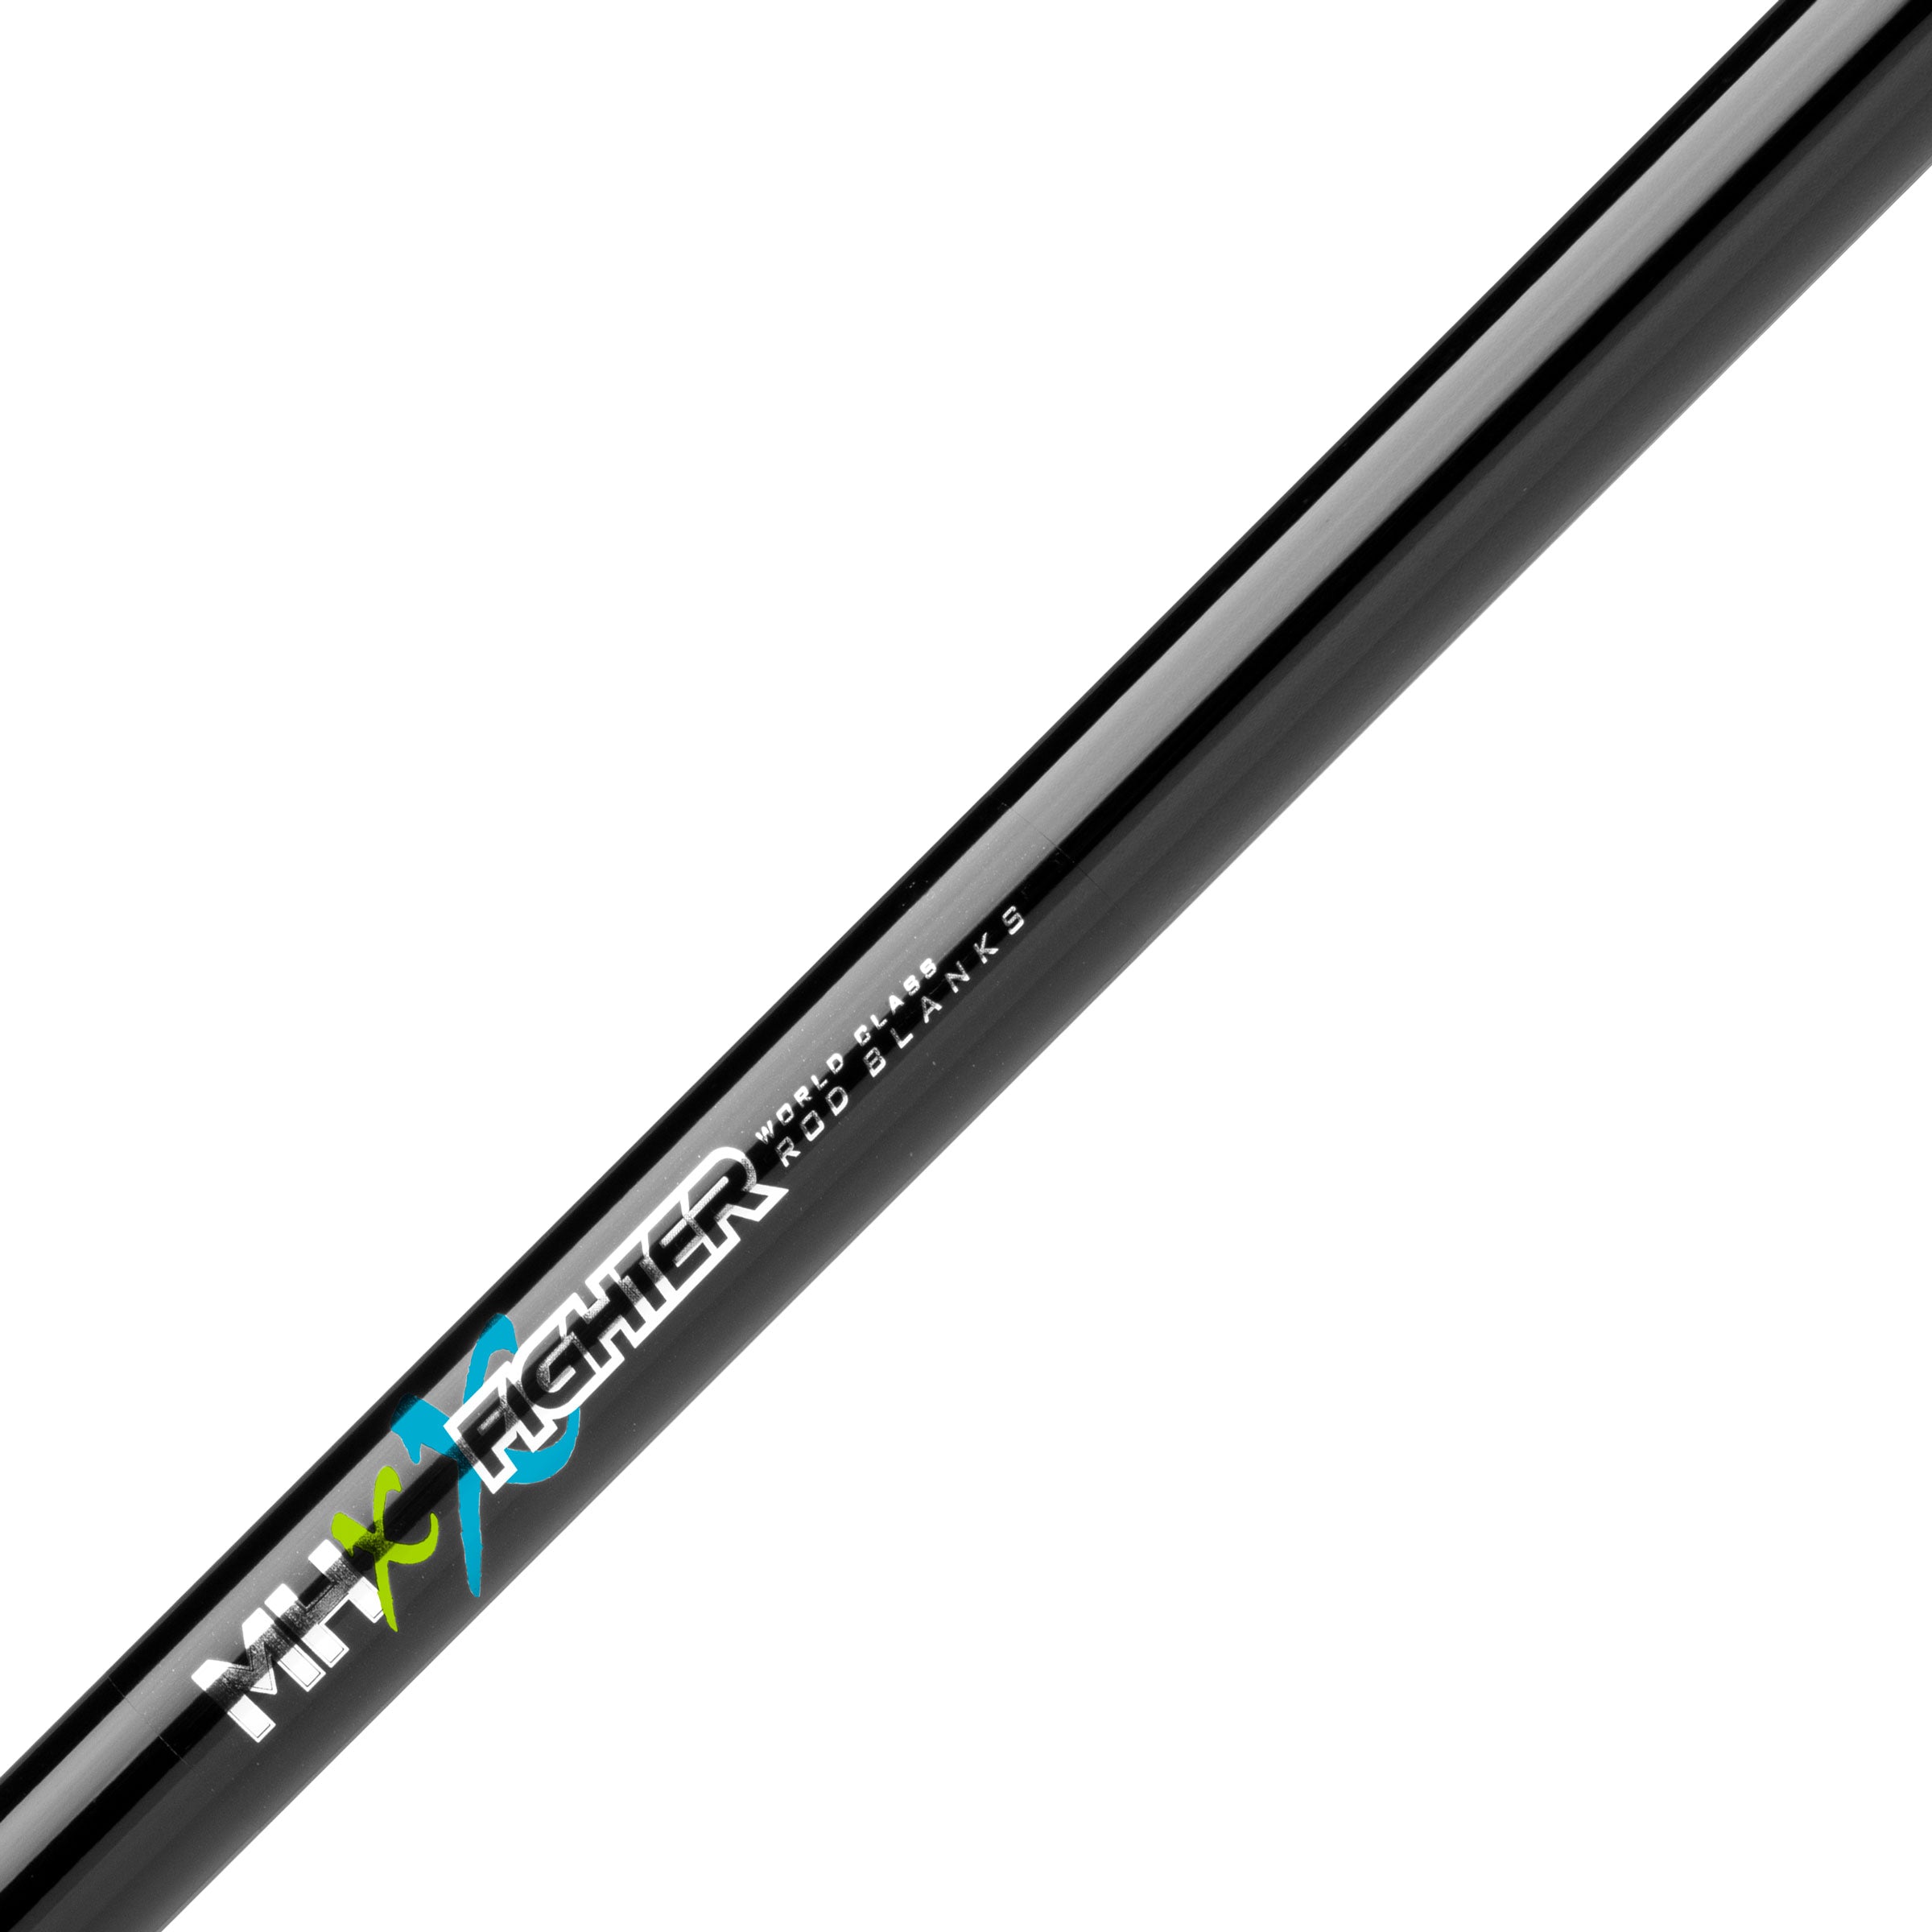 MHX 4'10 Heavy X-Fighter Offshore Graphite Composite Rod Blank XF410H